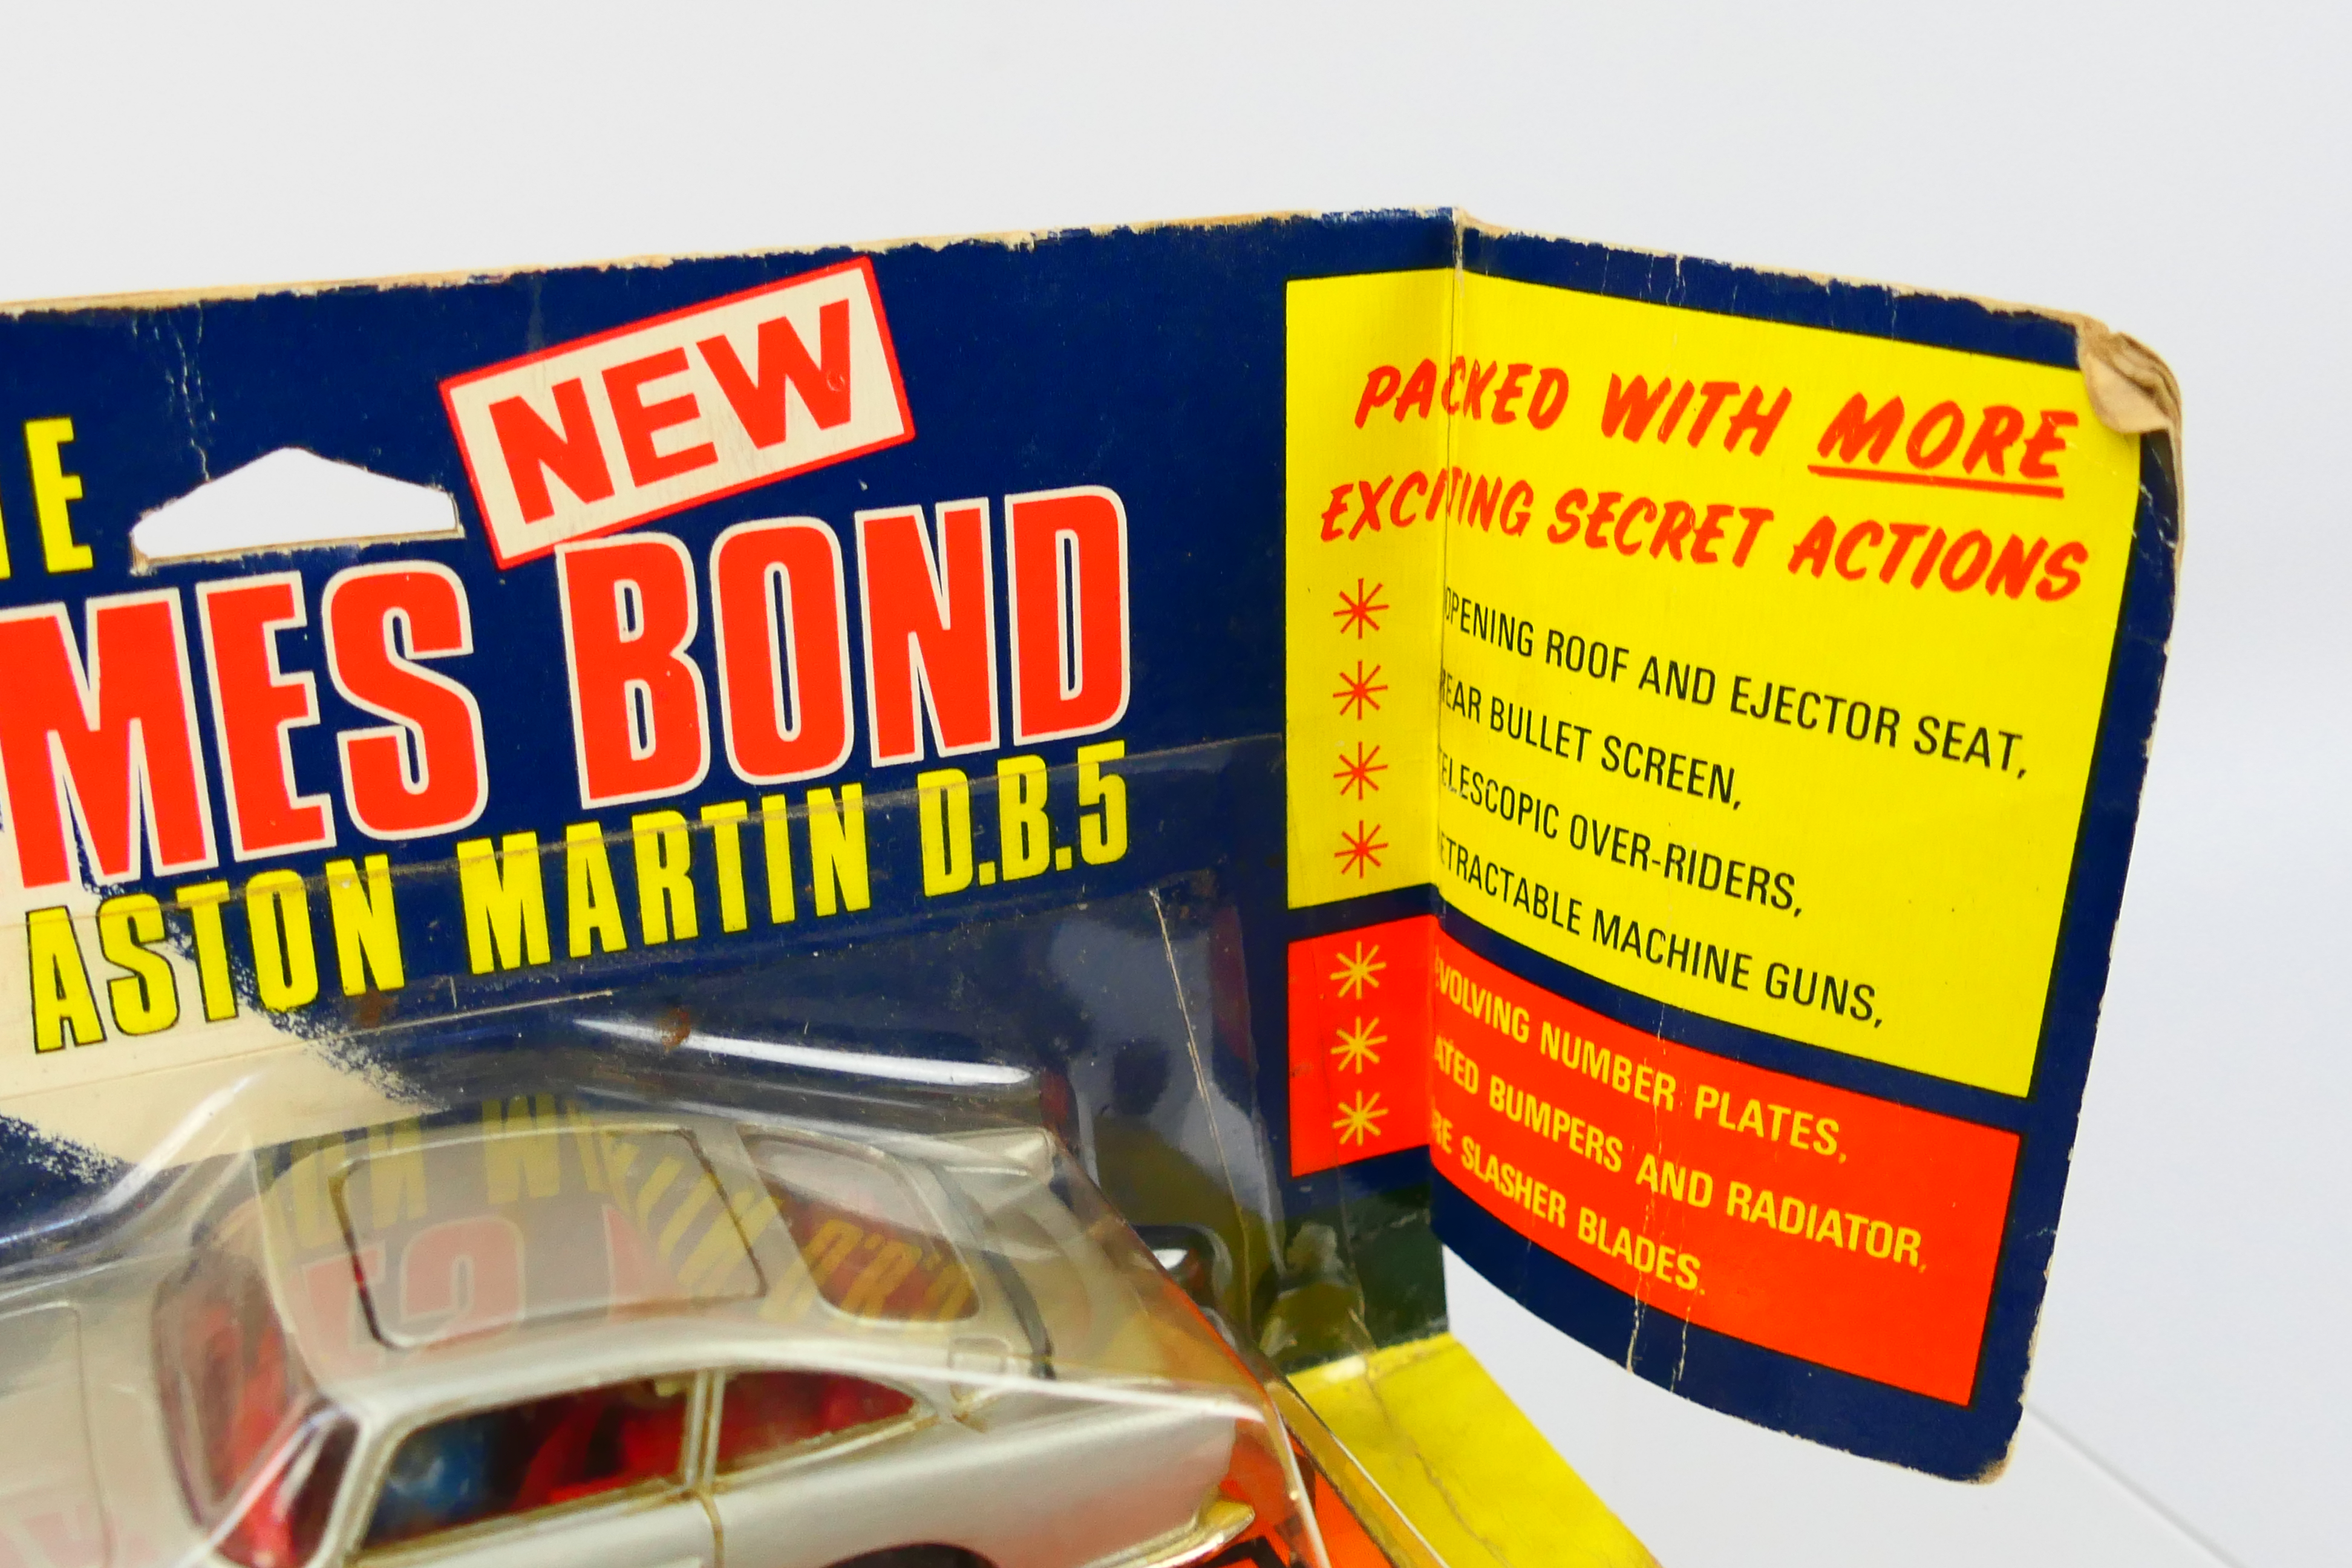 Corgi - James Bond - An unopened 007 Aston Martin DB5 in the early pictorial wing flap packaging # - Image 5 of 8